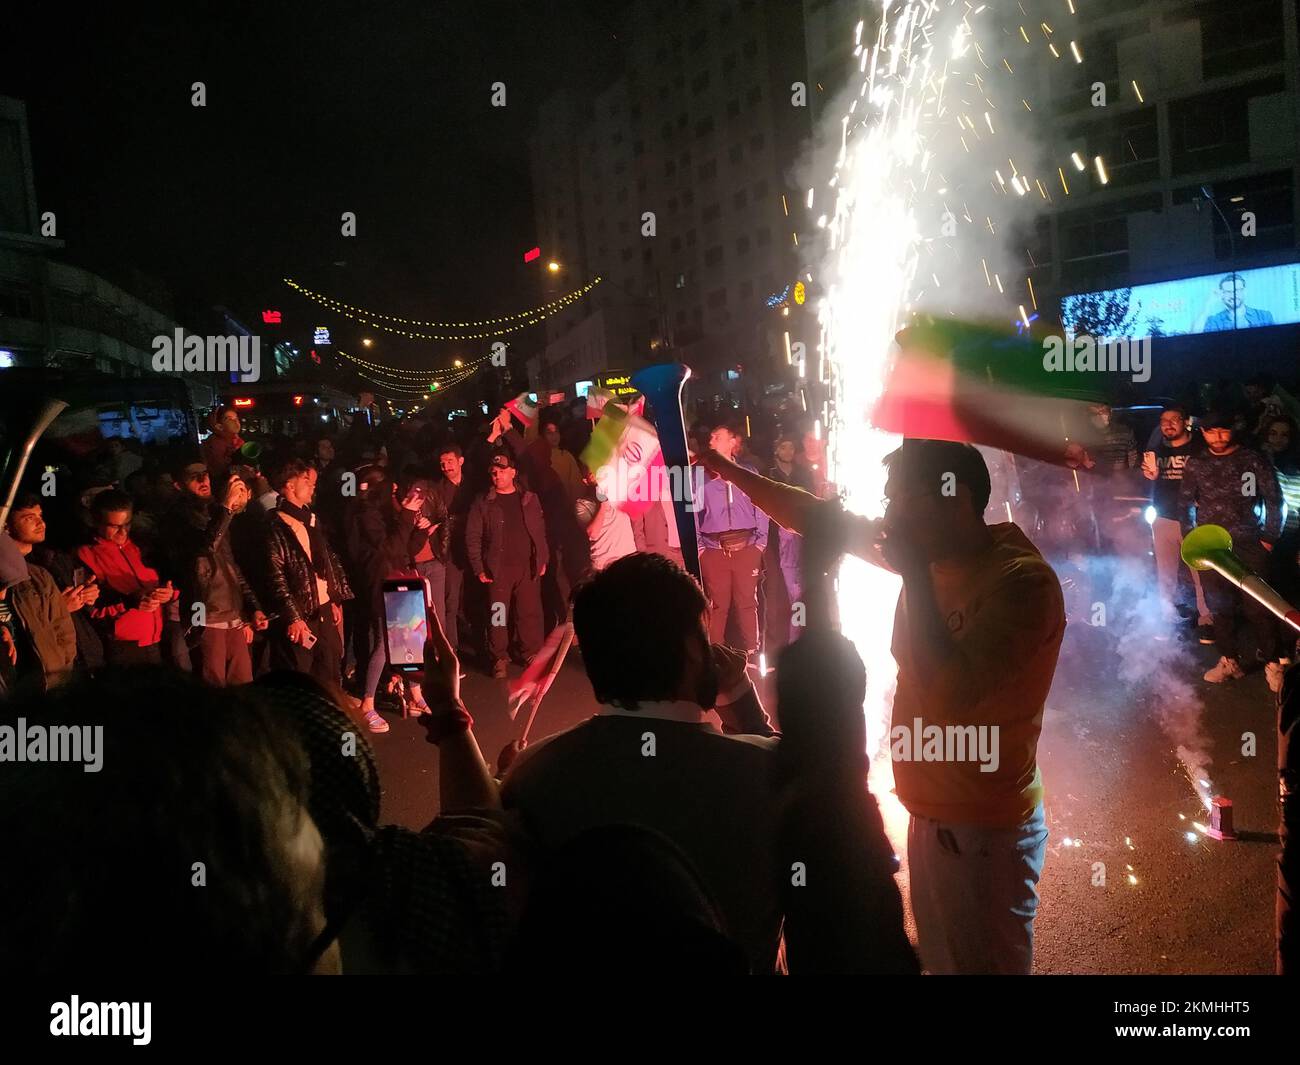 Tehran, Tehran, Iran. 25th Nov, 2022. Iranians celebrate their national soccer team's win against Wales. Iran won 2-0 against Wales during the FIFA 2022 World Cup in Qatar. Iran struck twice in the dying moments of added time to earn a 2-0 win over 10-man Wales in their Group B clash at the World Cup today. Rouzbeh Cheshmi and Ramin Rezaeian scored to give Iran a famous win, which moved them into second place in the group behind England, who face the USA later in the day. (Credit Image: © Stringer via ZUMA Press Wire) Stock Photo